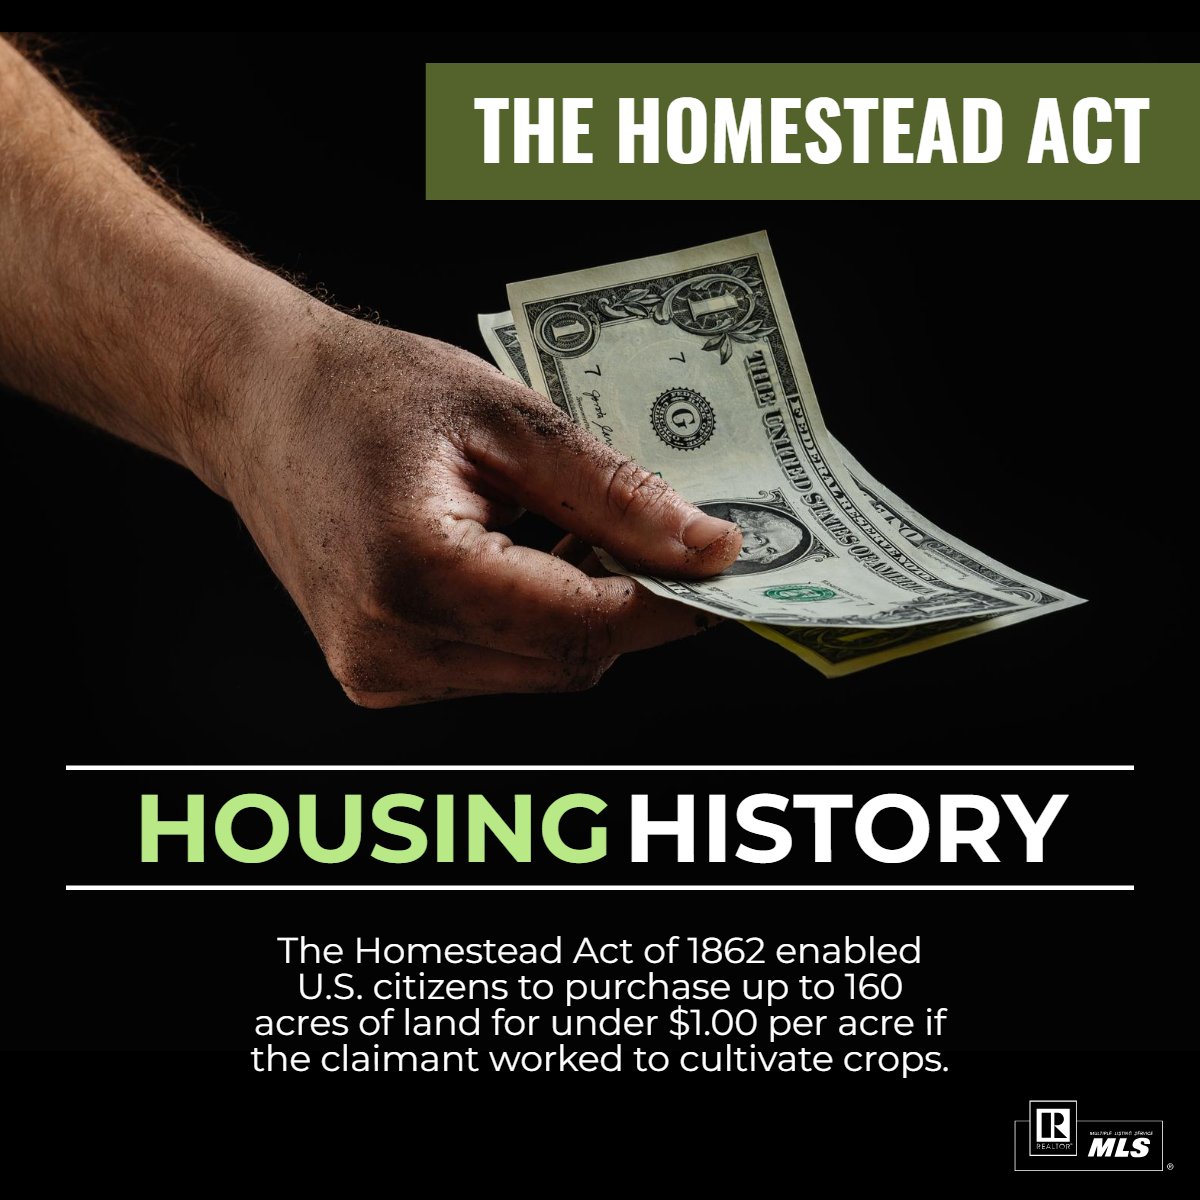 Happy Sunday! 🌞😎

Did you know this History fact?

In 1862 the Homestead Act allowed many to buy land to cultivate. 

This legislation offered 160 acres of public land encouraging people to settle, cultivate, and build a home. 

#Housing  #HomesteadAct